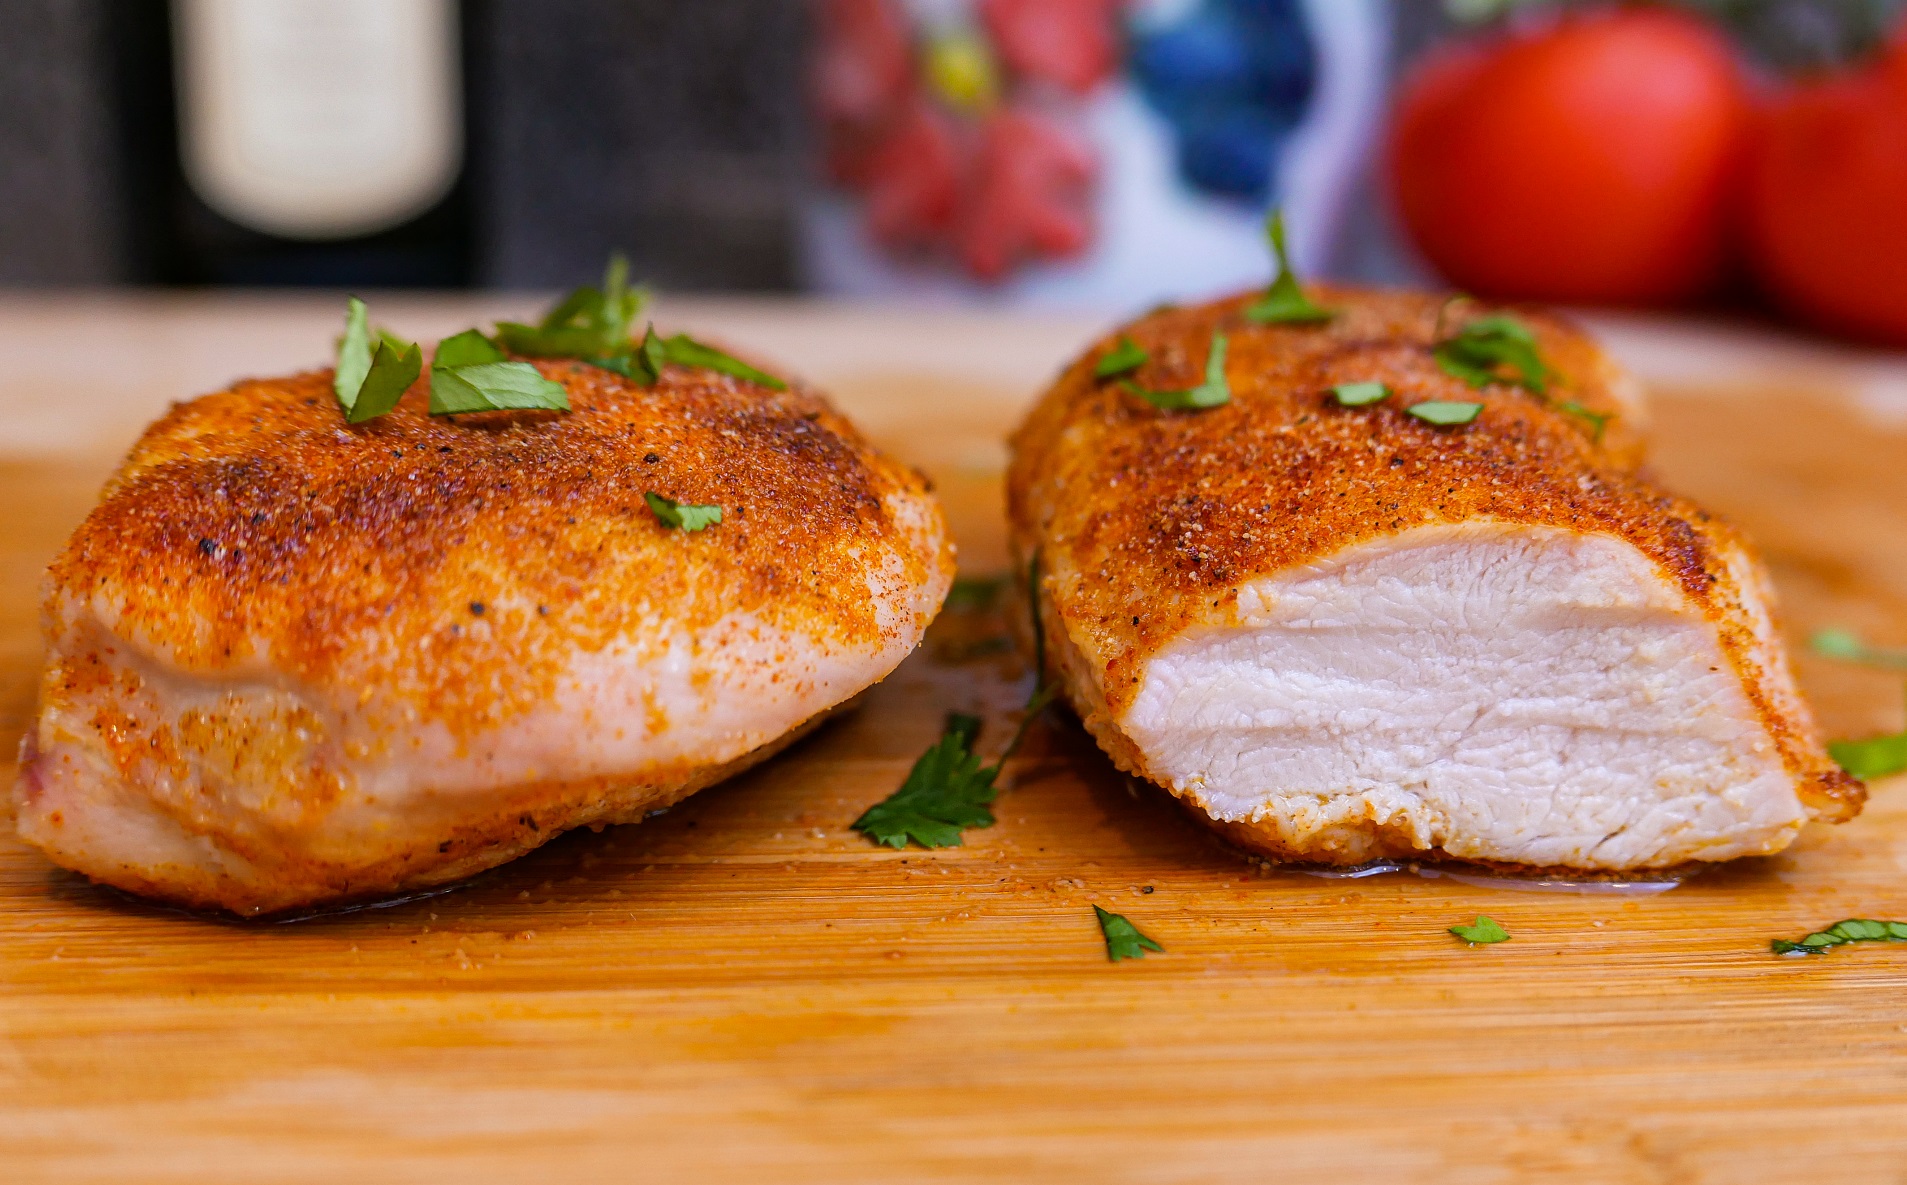 How To Cook Chicken Breast In The Oven